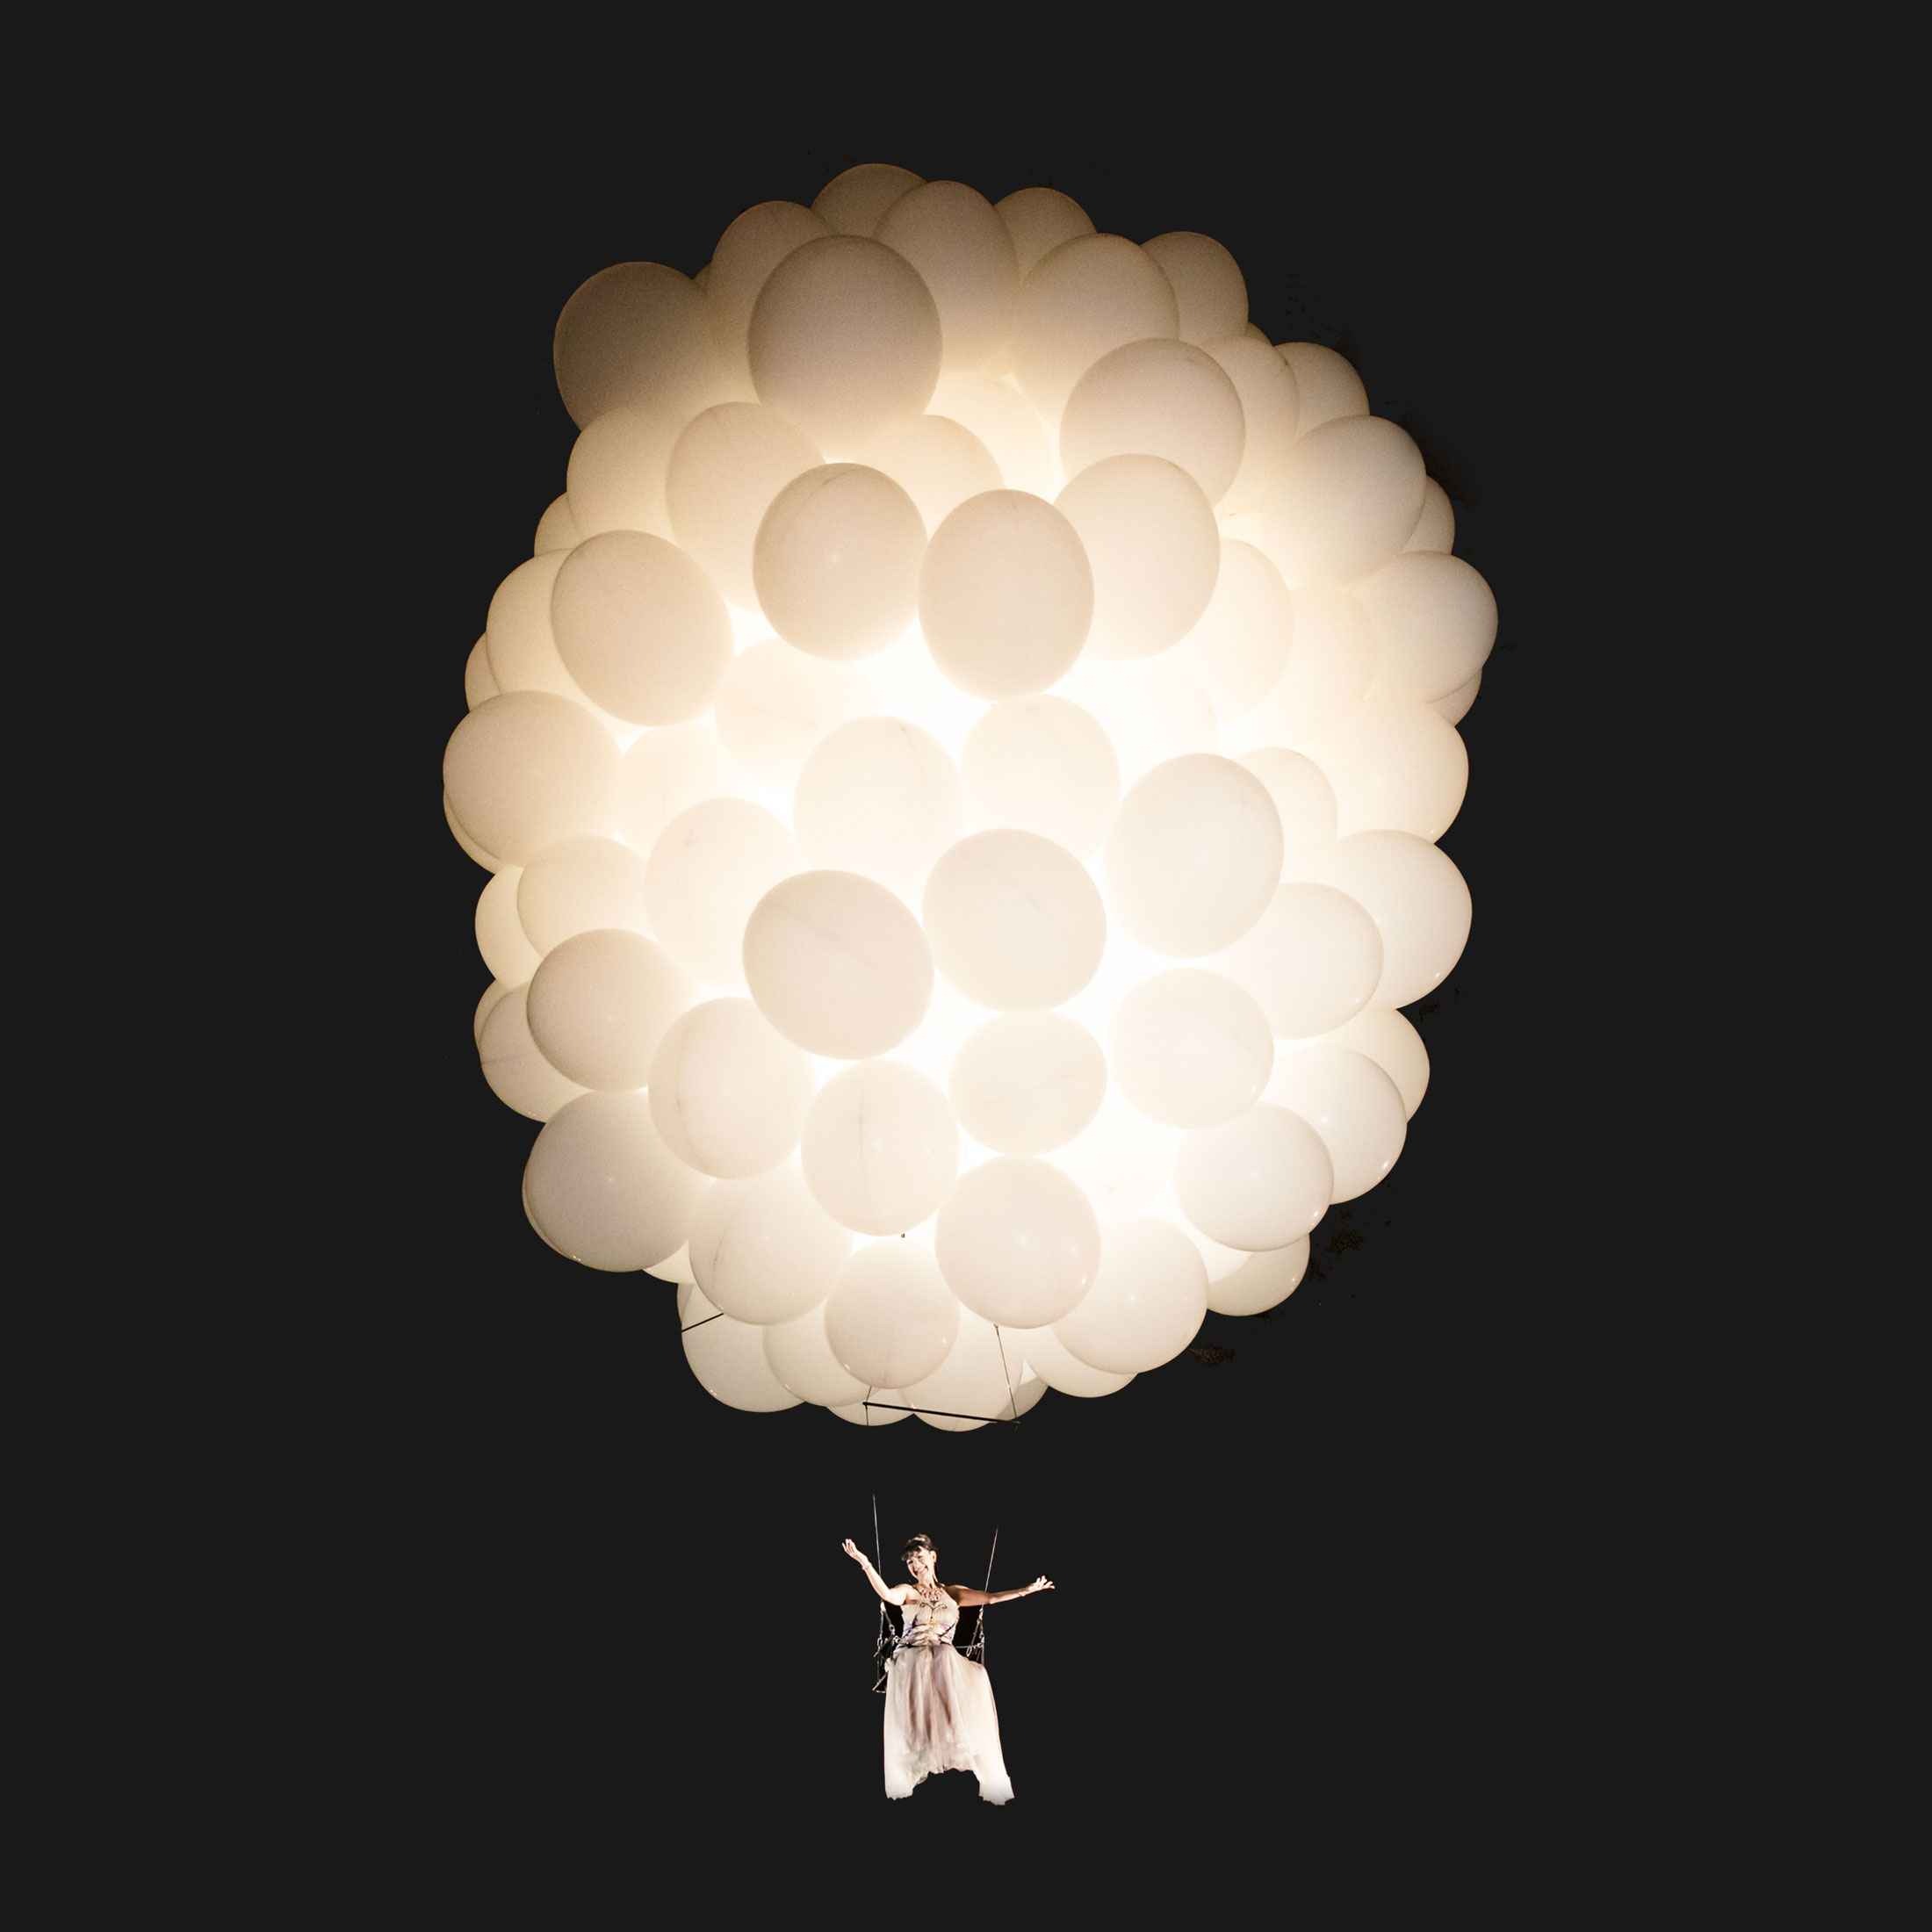 Opera singer suspended in the sky by balloons